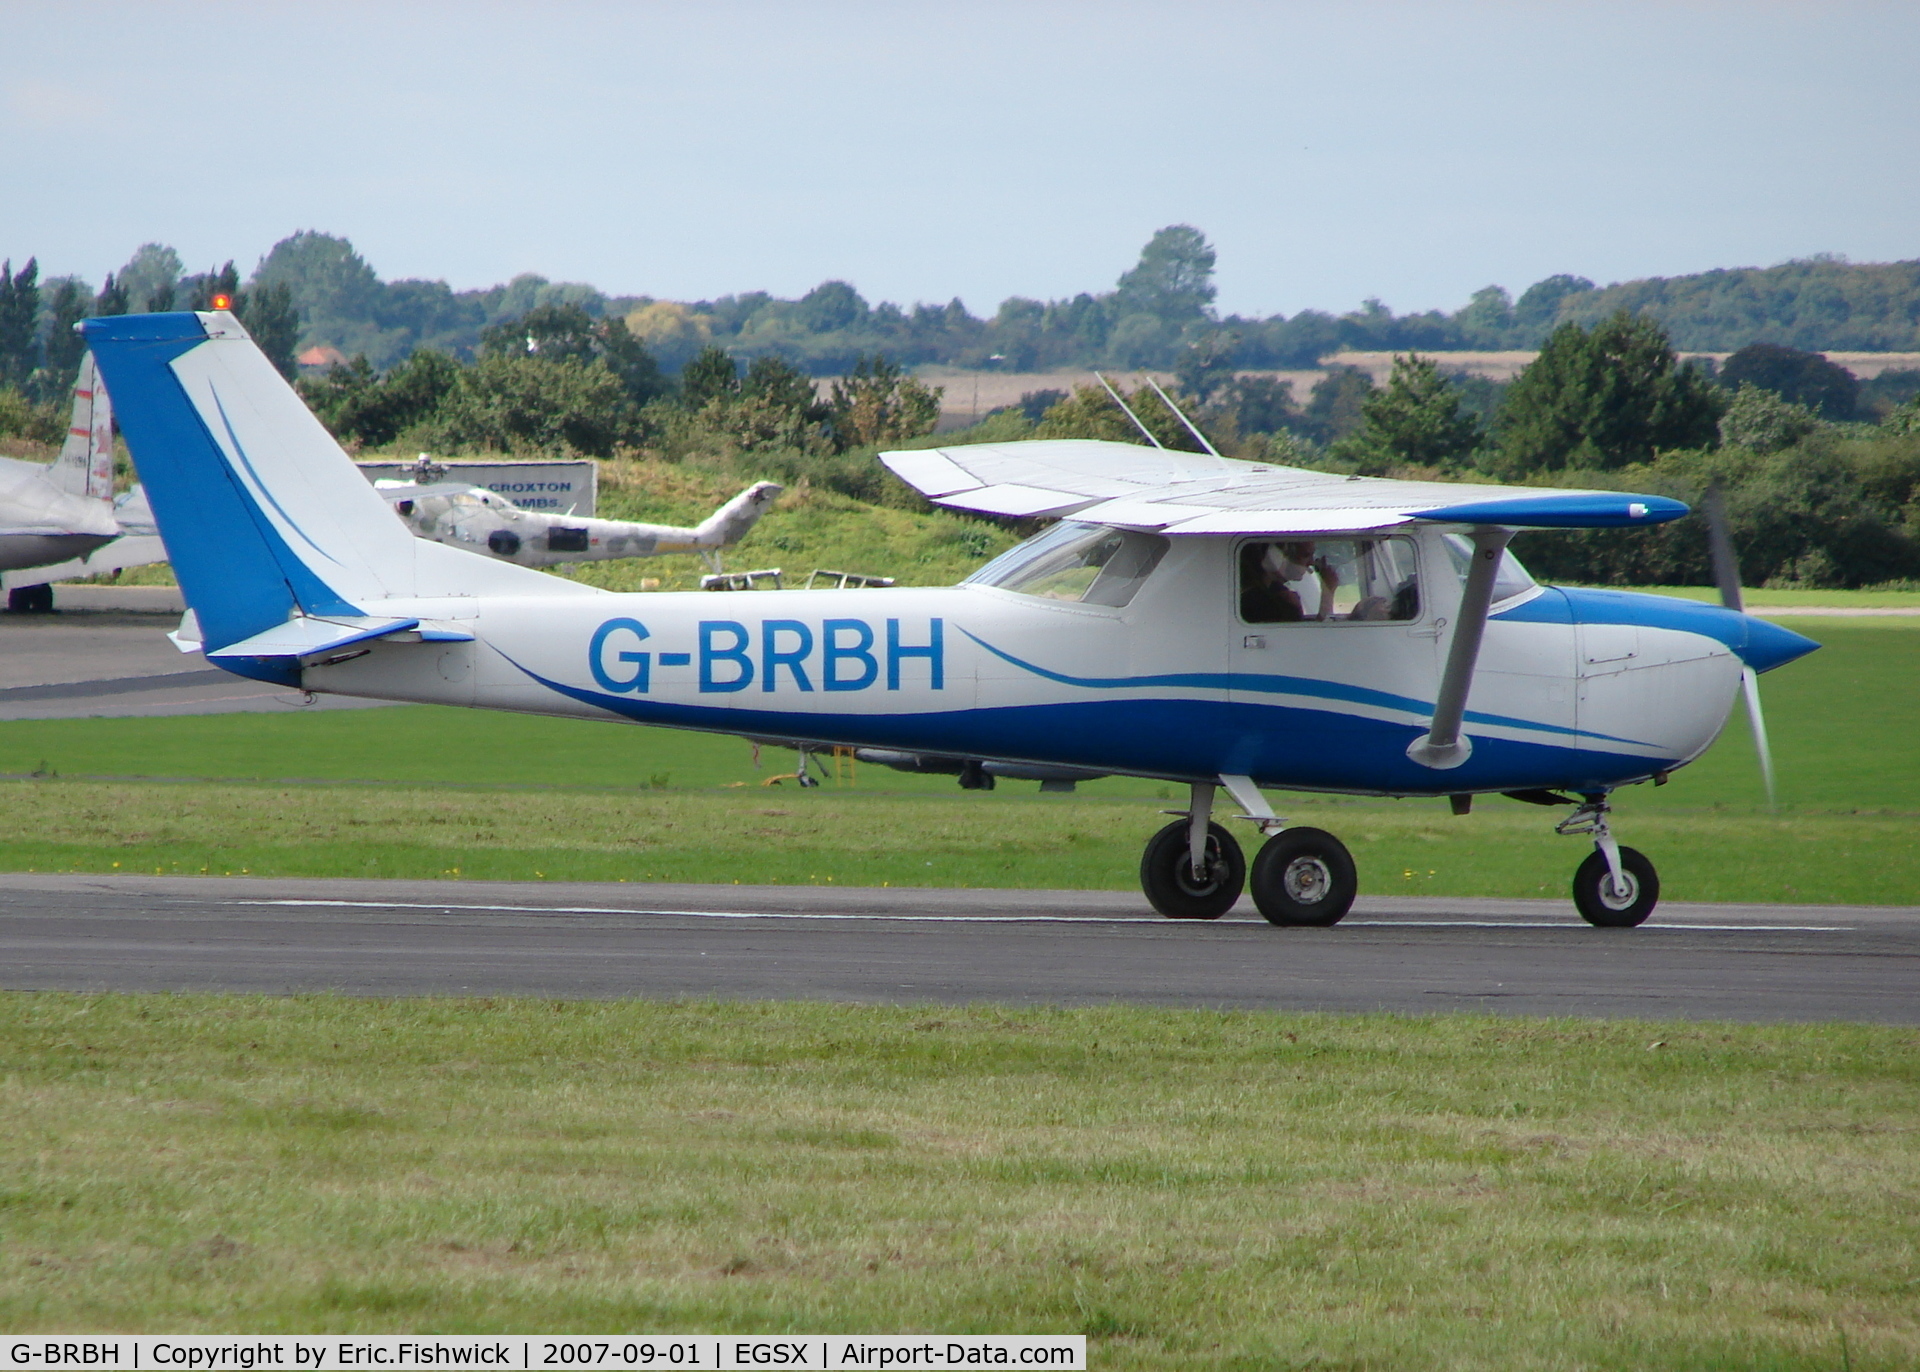 G-BRBH, 1968 Cessna 150H C/N 150-69283, 2. G-BRBH at North Weald